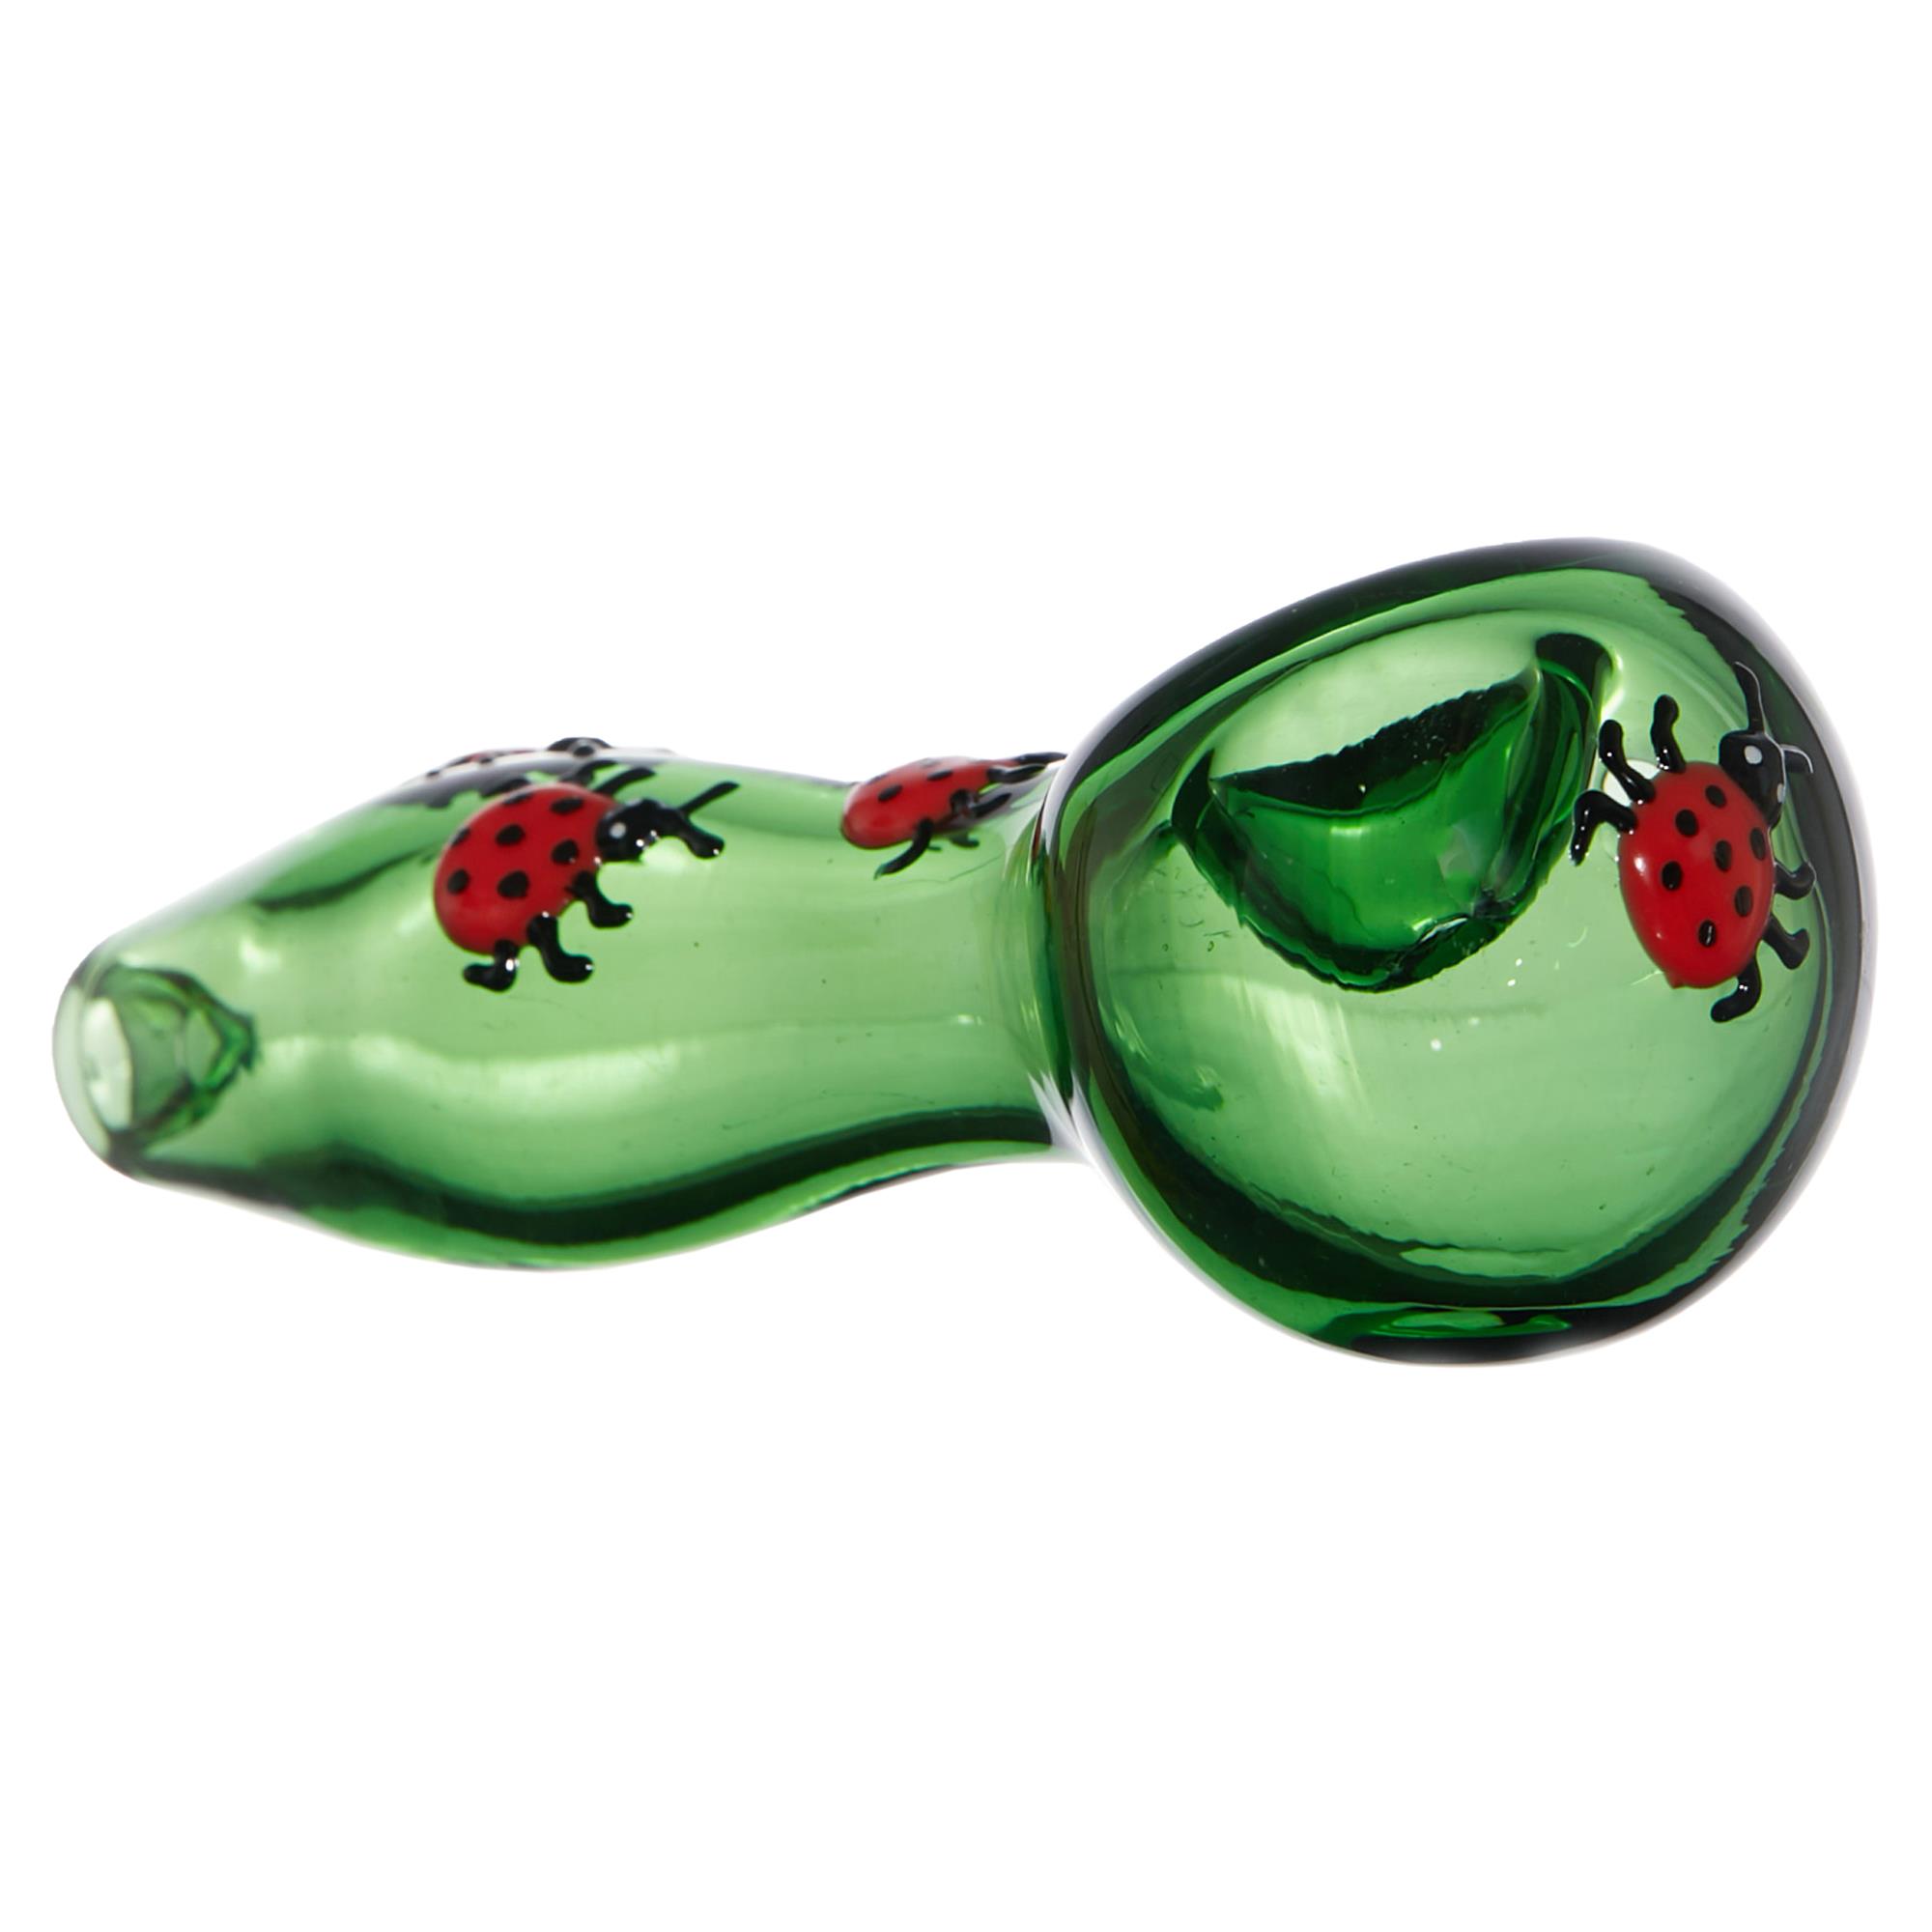 GLOW IN THE DARK LADY BUG PIPE